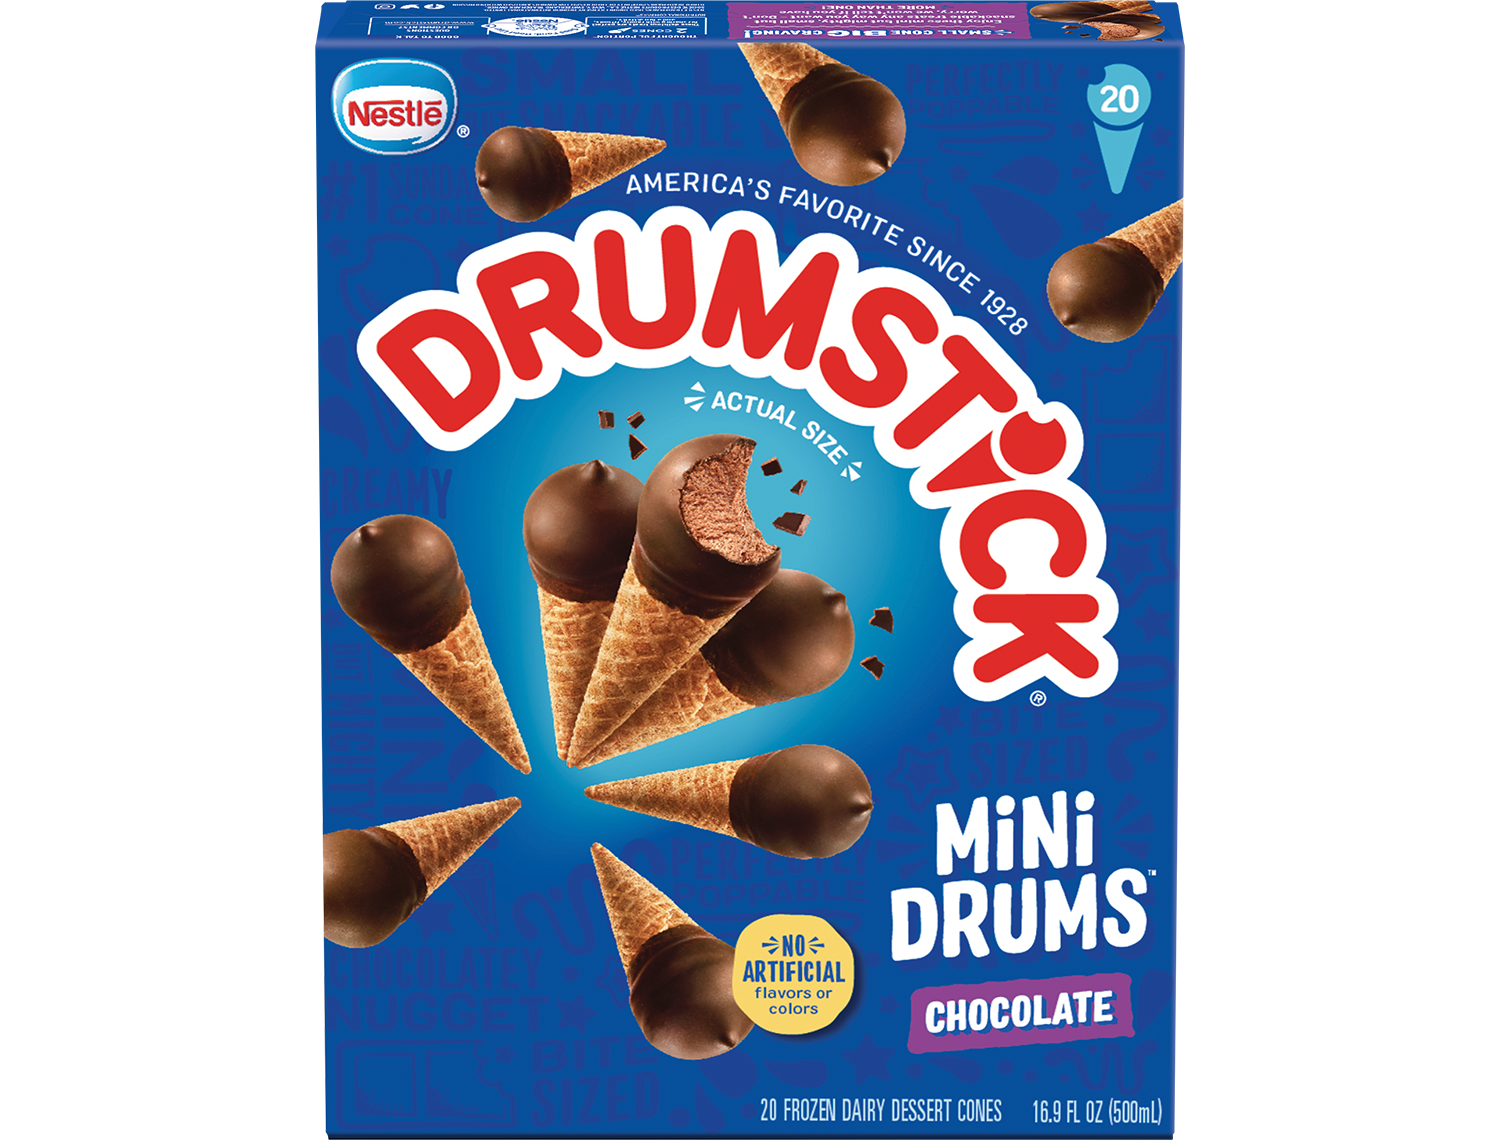 Box of Drumstick chocolate mini drums